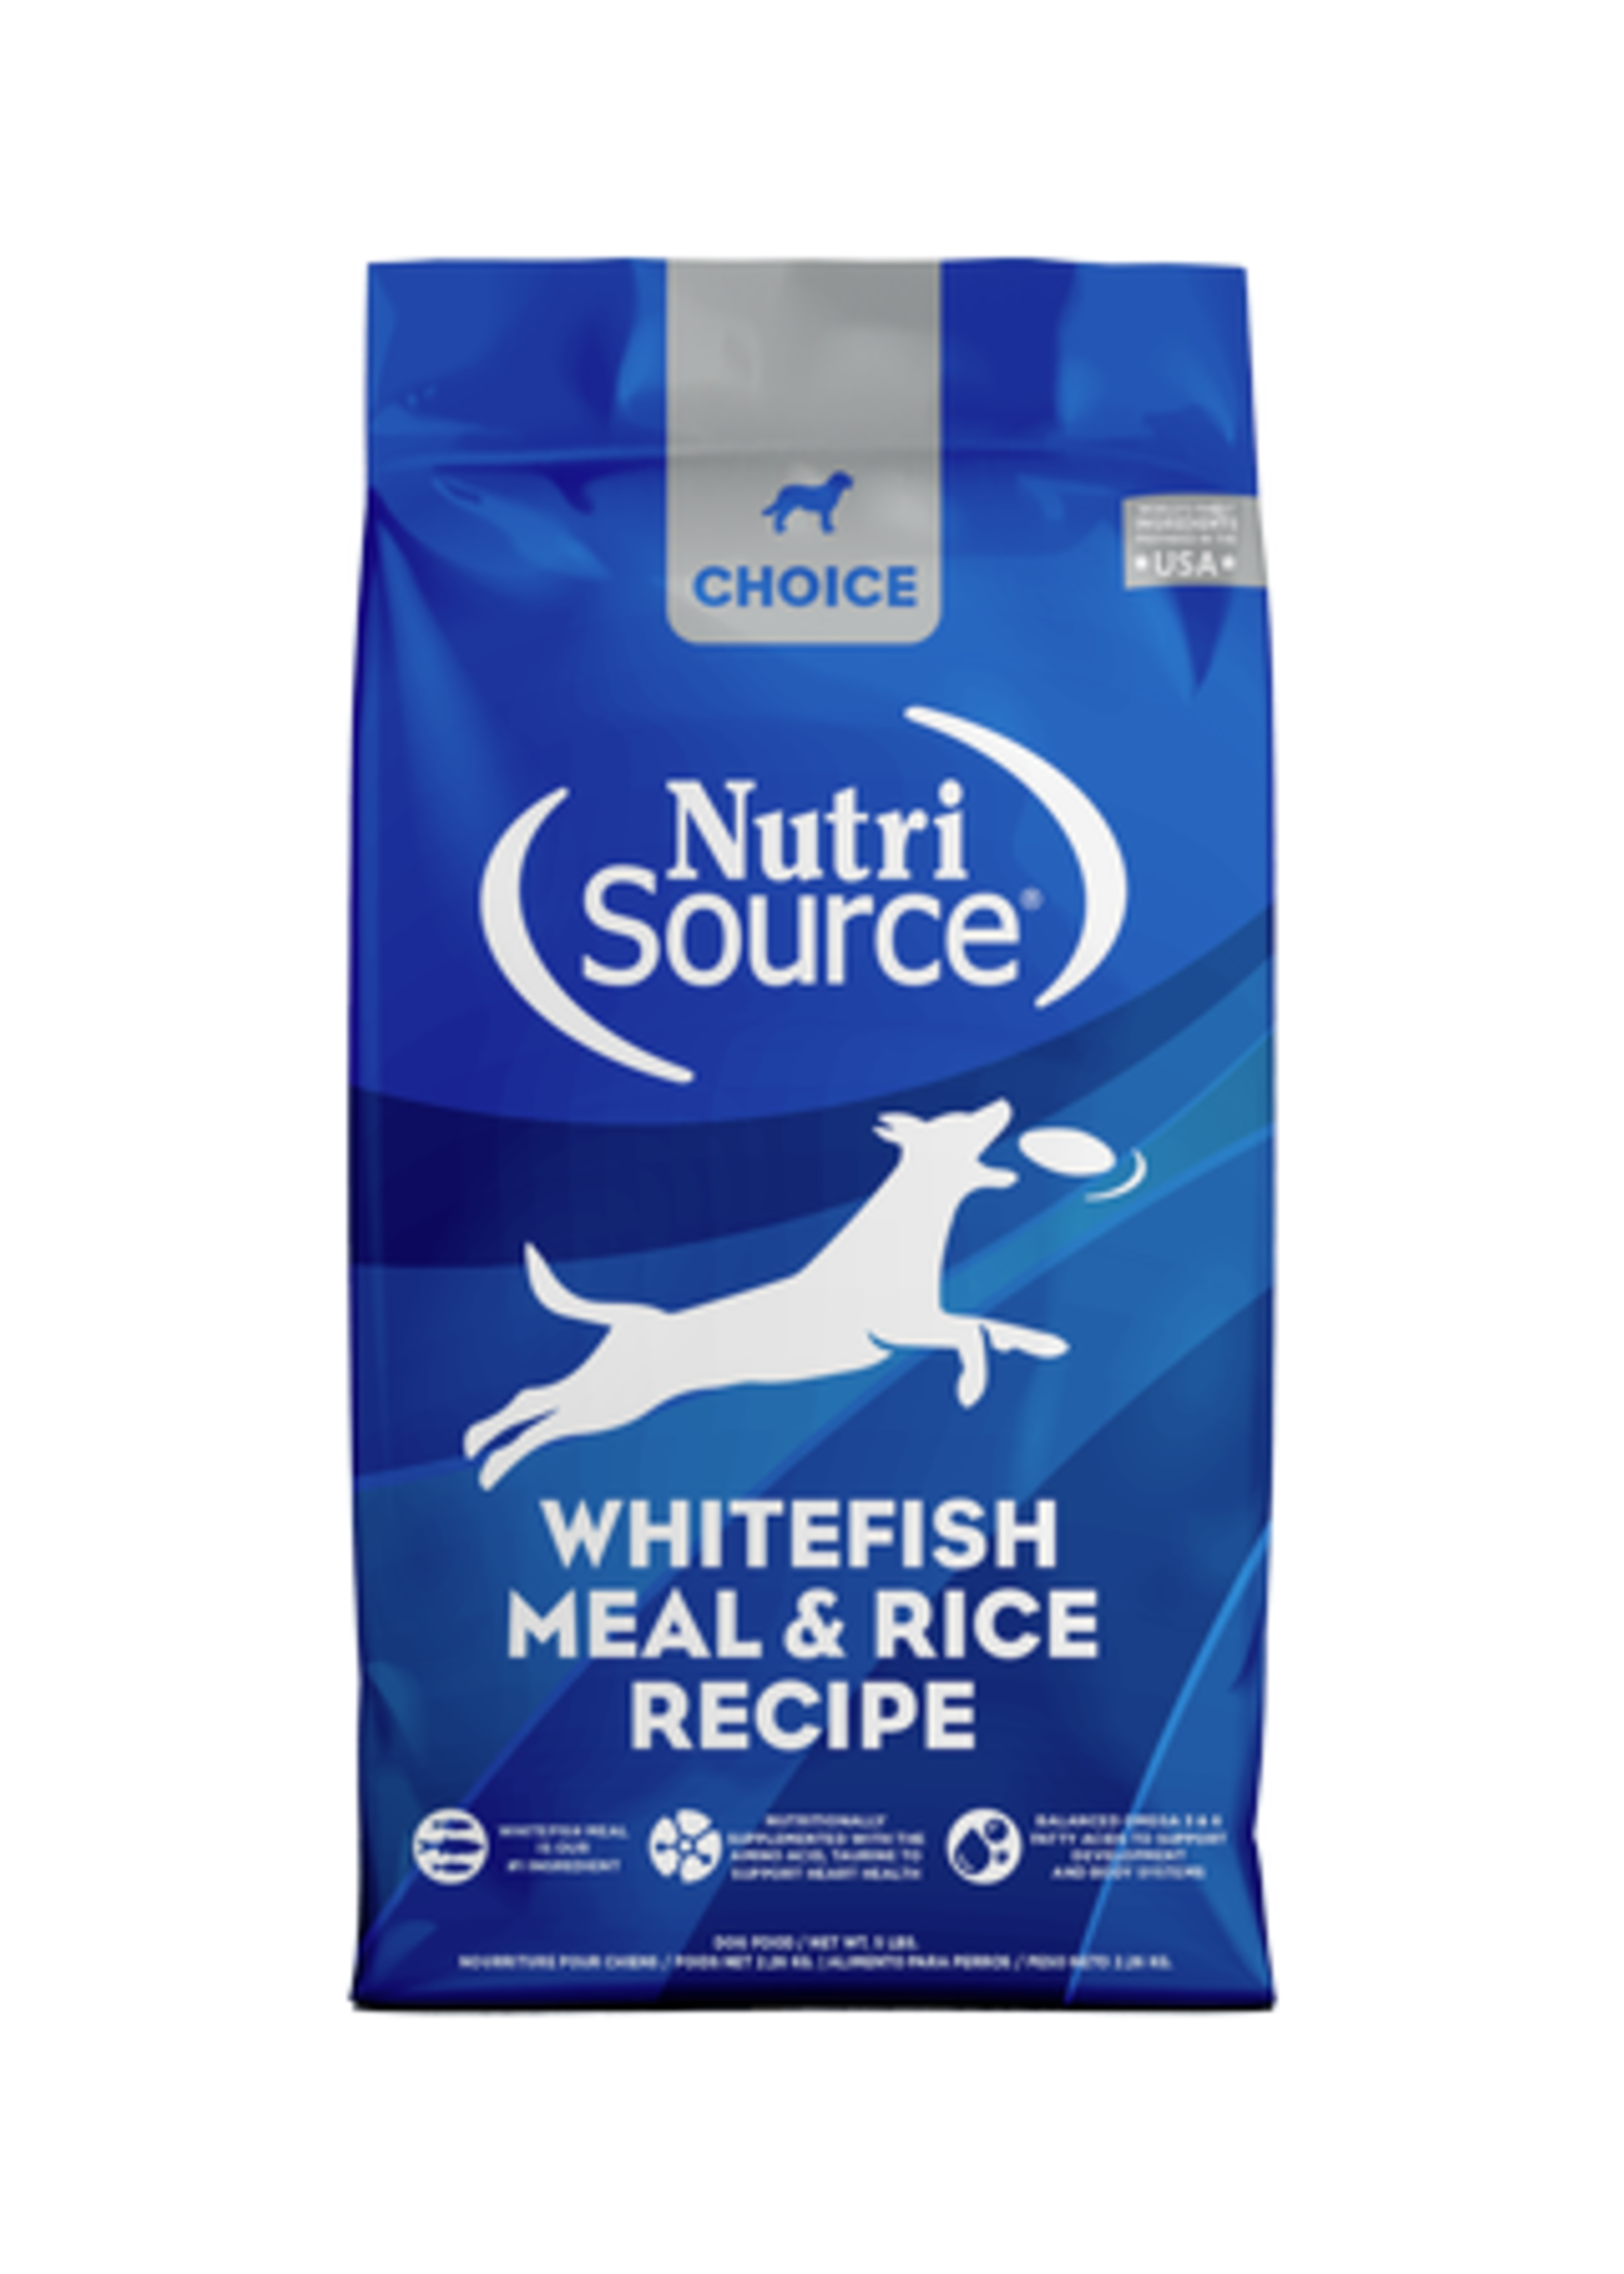 NutriSource Nutrisource Choice Dog Whitefish Meal & Rice 5lbss